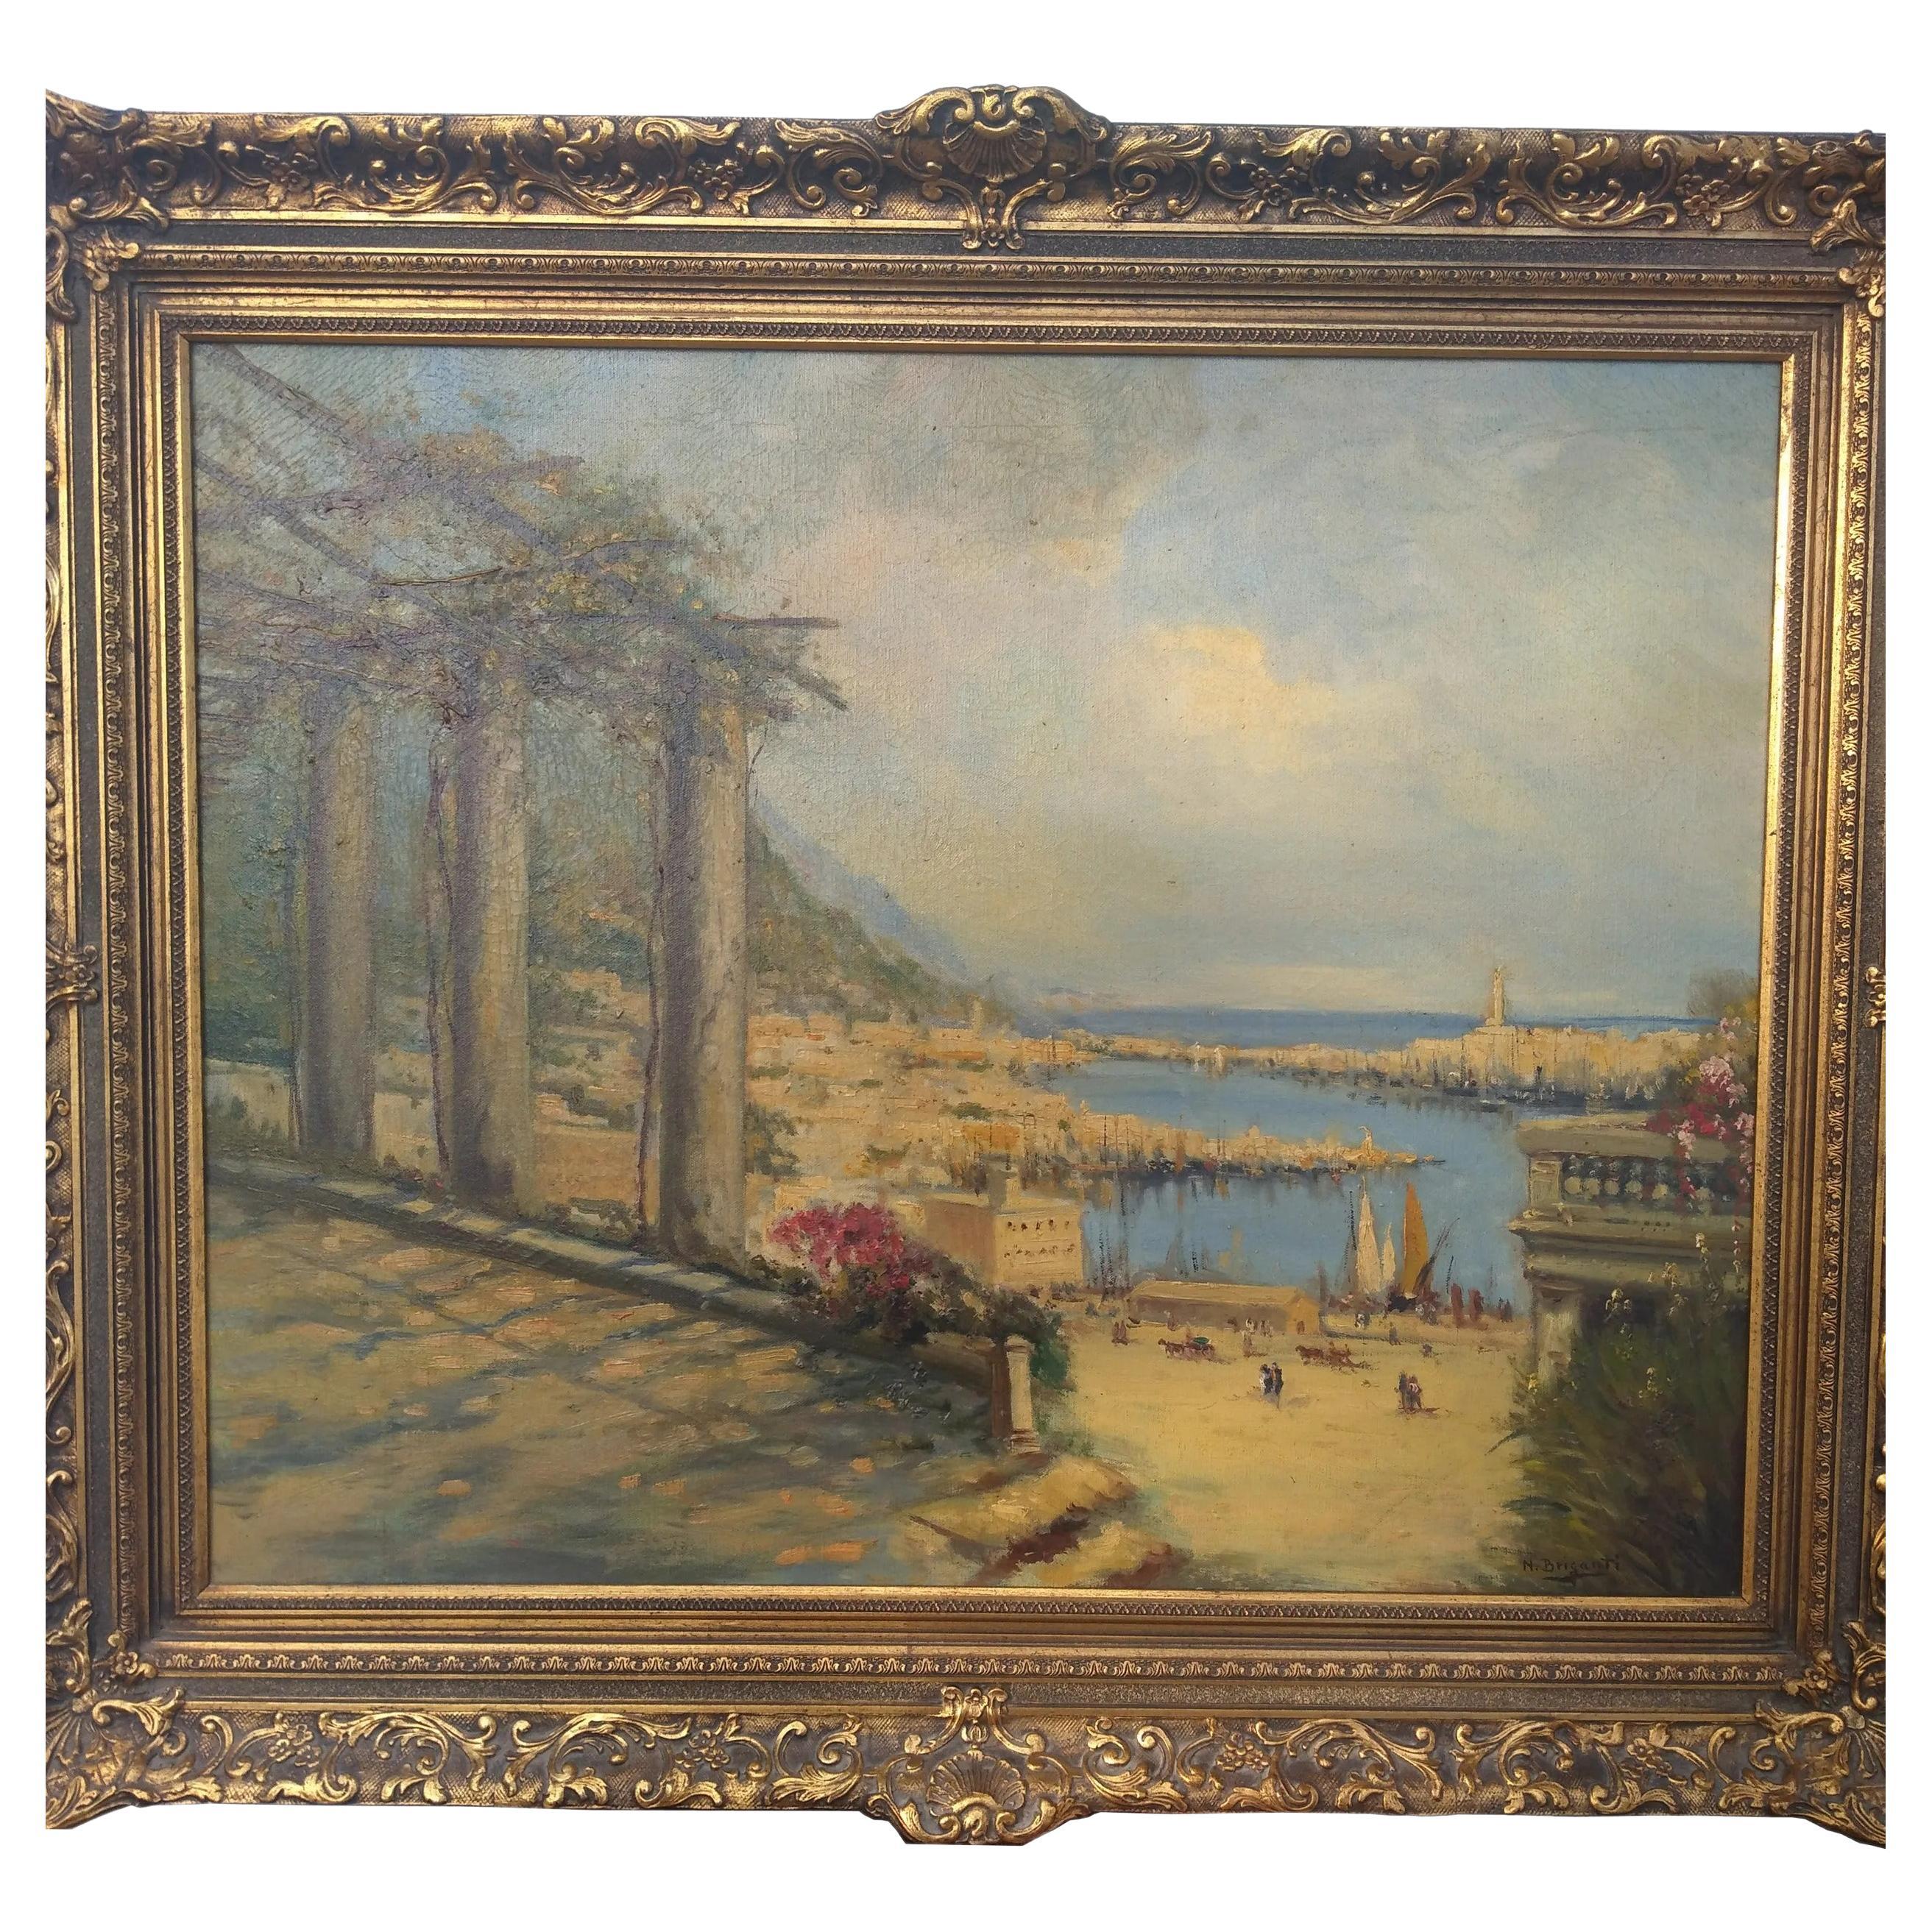 1861-1944
Nicolas Briganti oil on canvas.
European Scene

Active in New Bedford, Massachusetts between 1893 and 1897, Nicholas Briganti painted luminous landscapes of bucolic scenes as well as figure and human activity. 

Briganti exhibited at